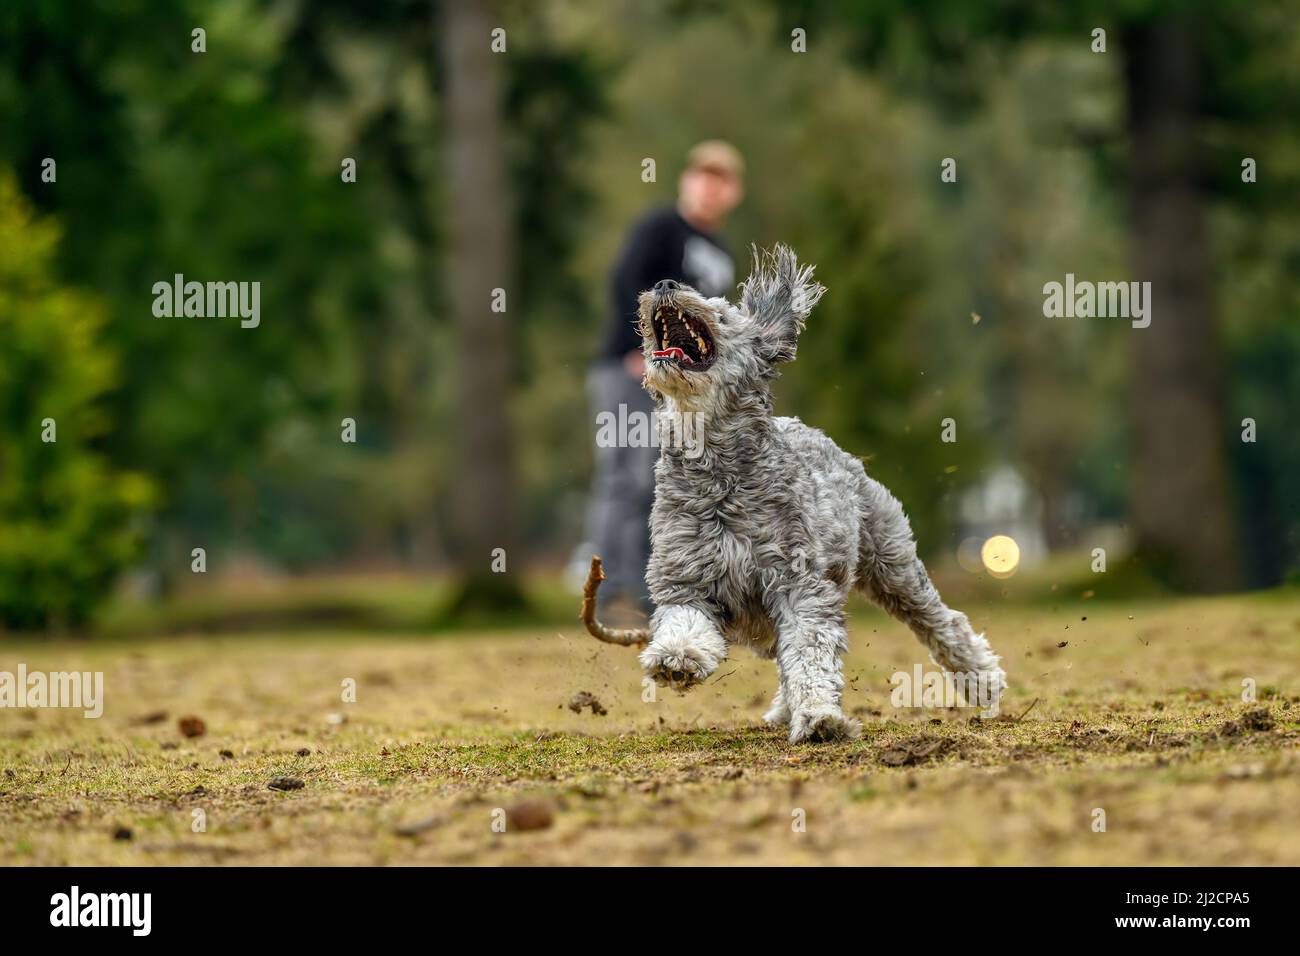 A young and playful goldendoodle dog is captured in high speed motion while he is running fast and jumping high to catch a flying frisbee in midair wh Stock Photo